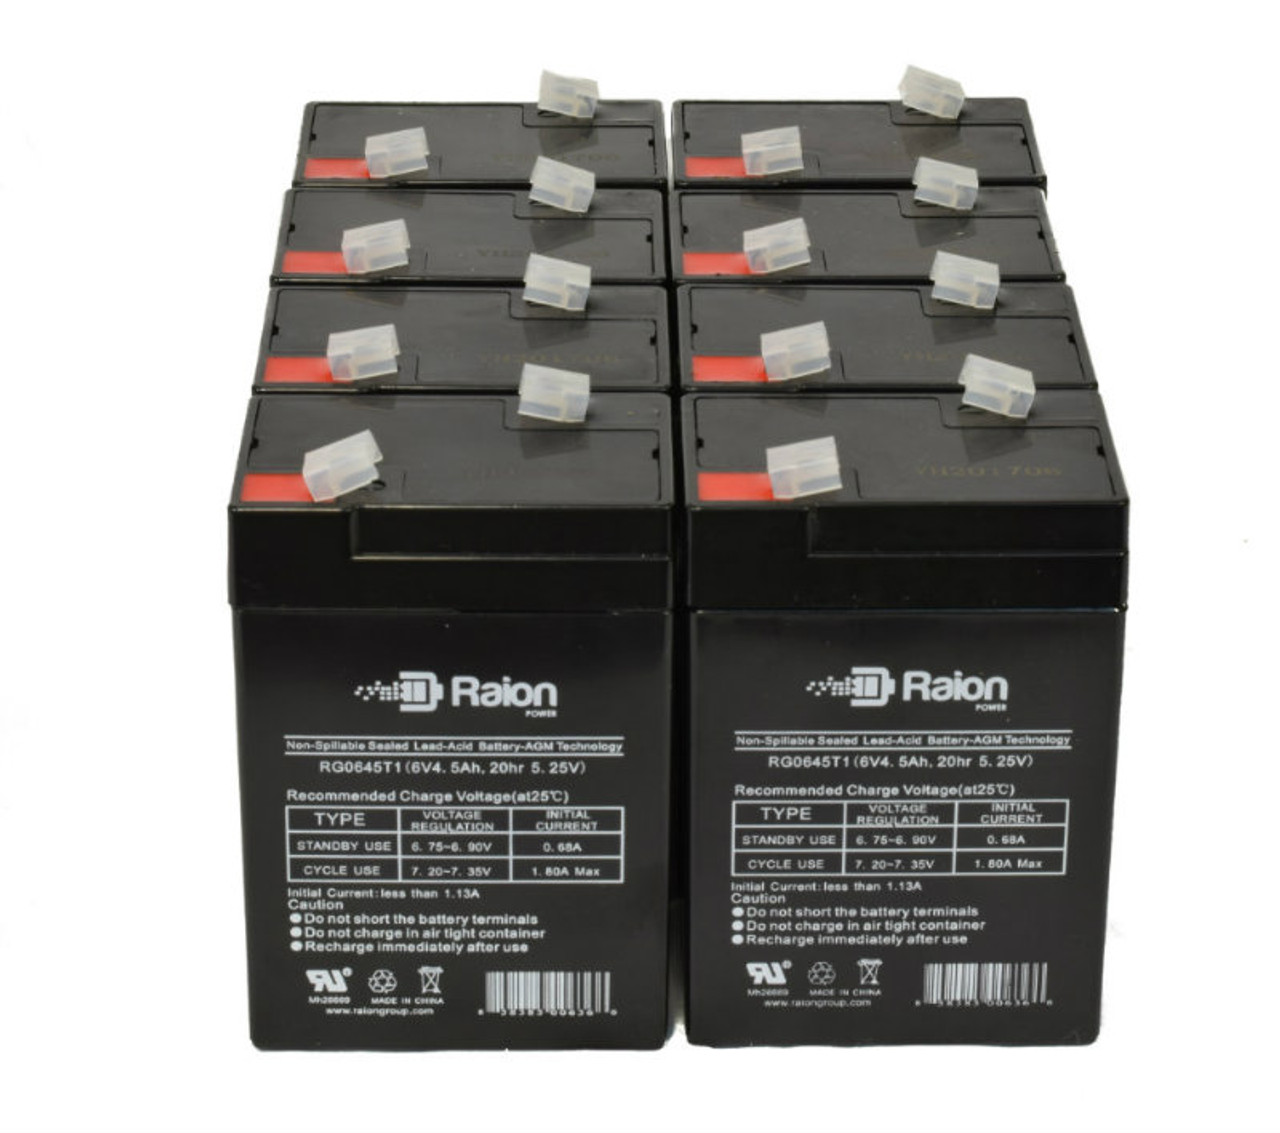 Raion Power 6 Volt 4.5Ah RG0645T1 Replacement Battery for ExpertPower EXP650 - 8 Pack